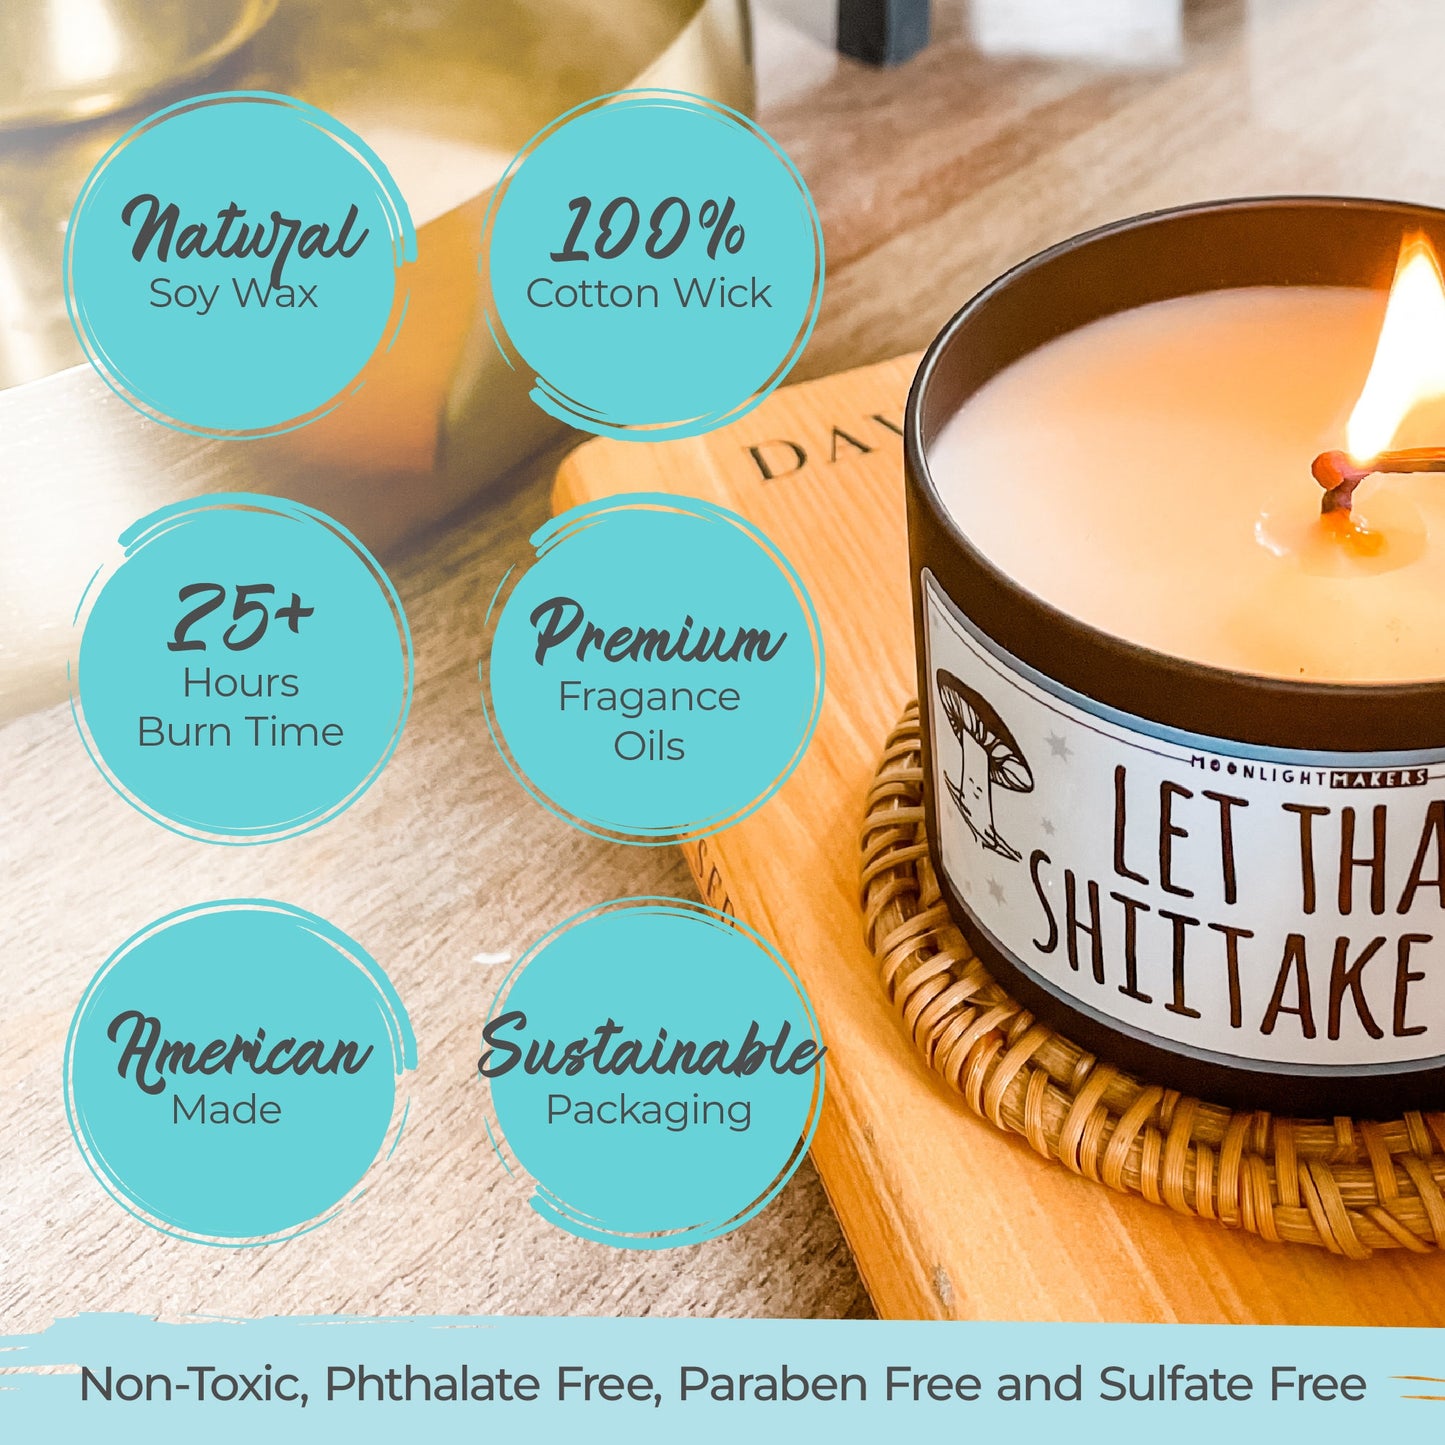 Let Your Light Shine - 8oz Candle - Choose Your Scent - 100% Natural Soy Wax